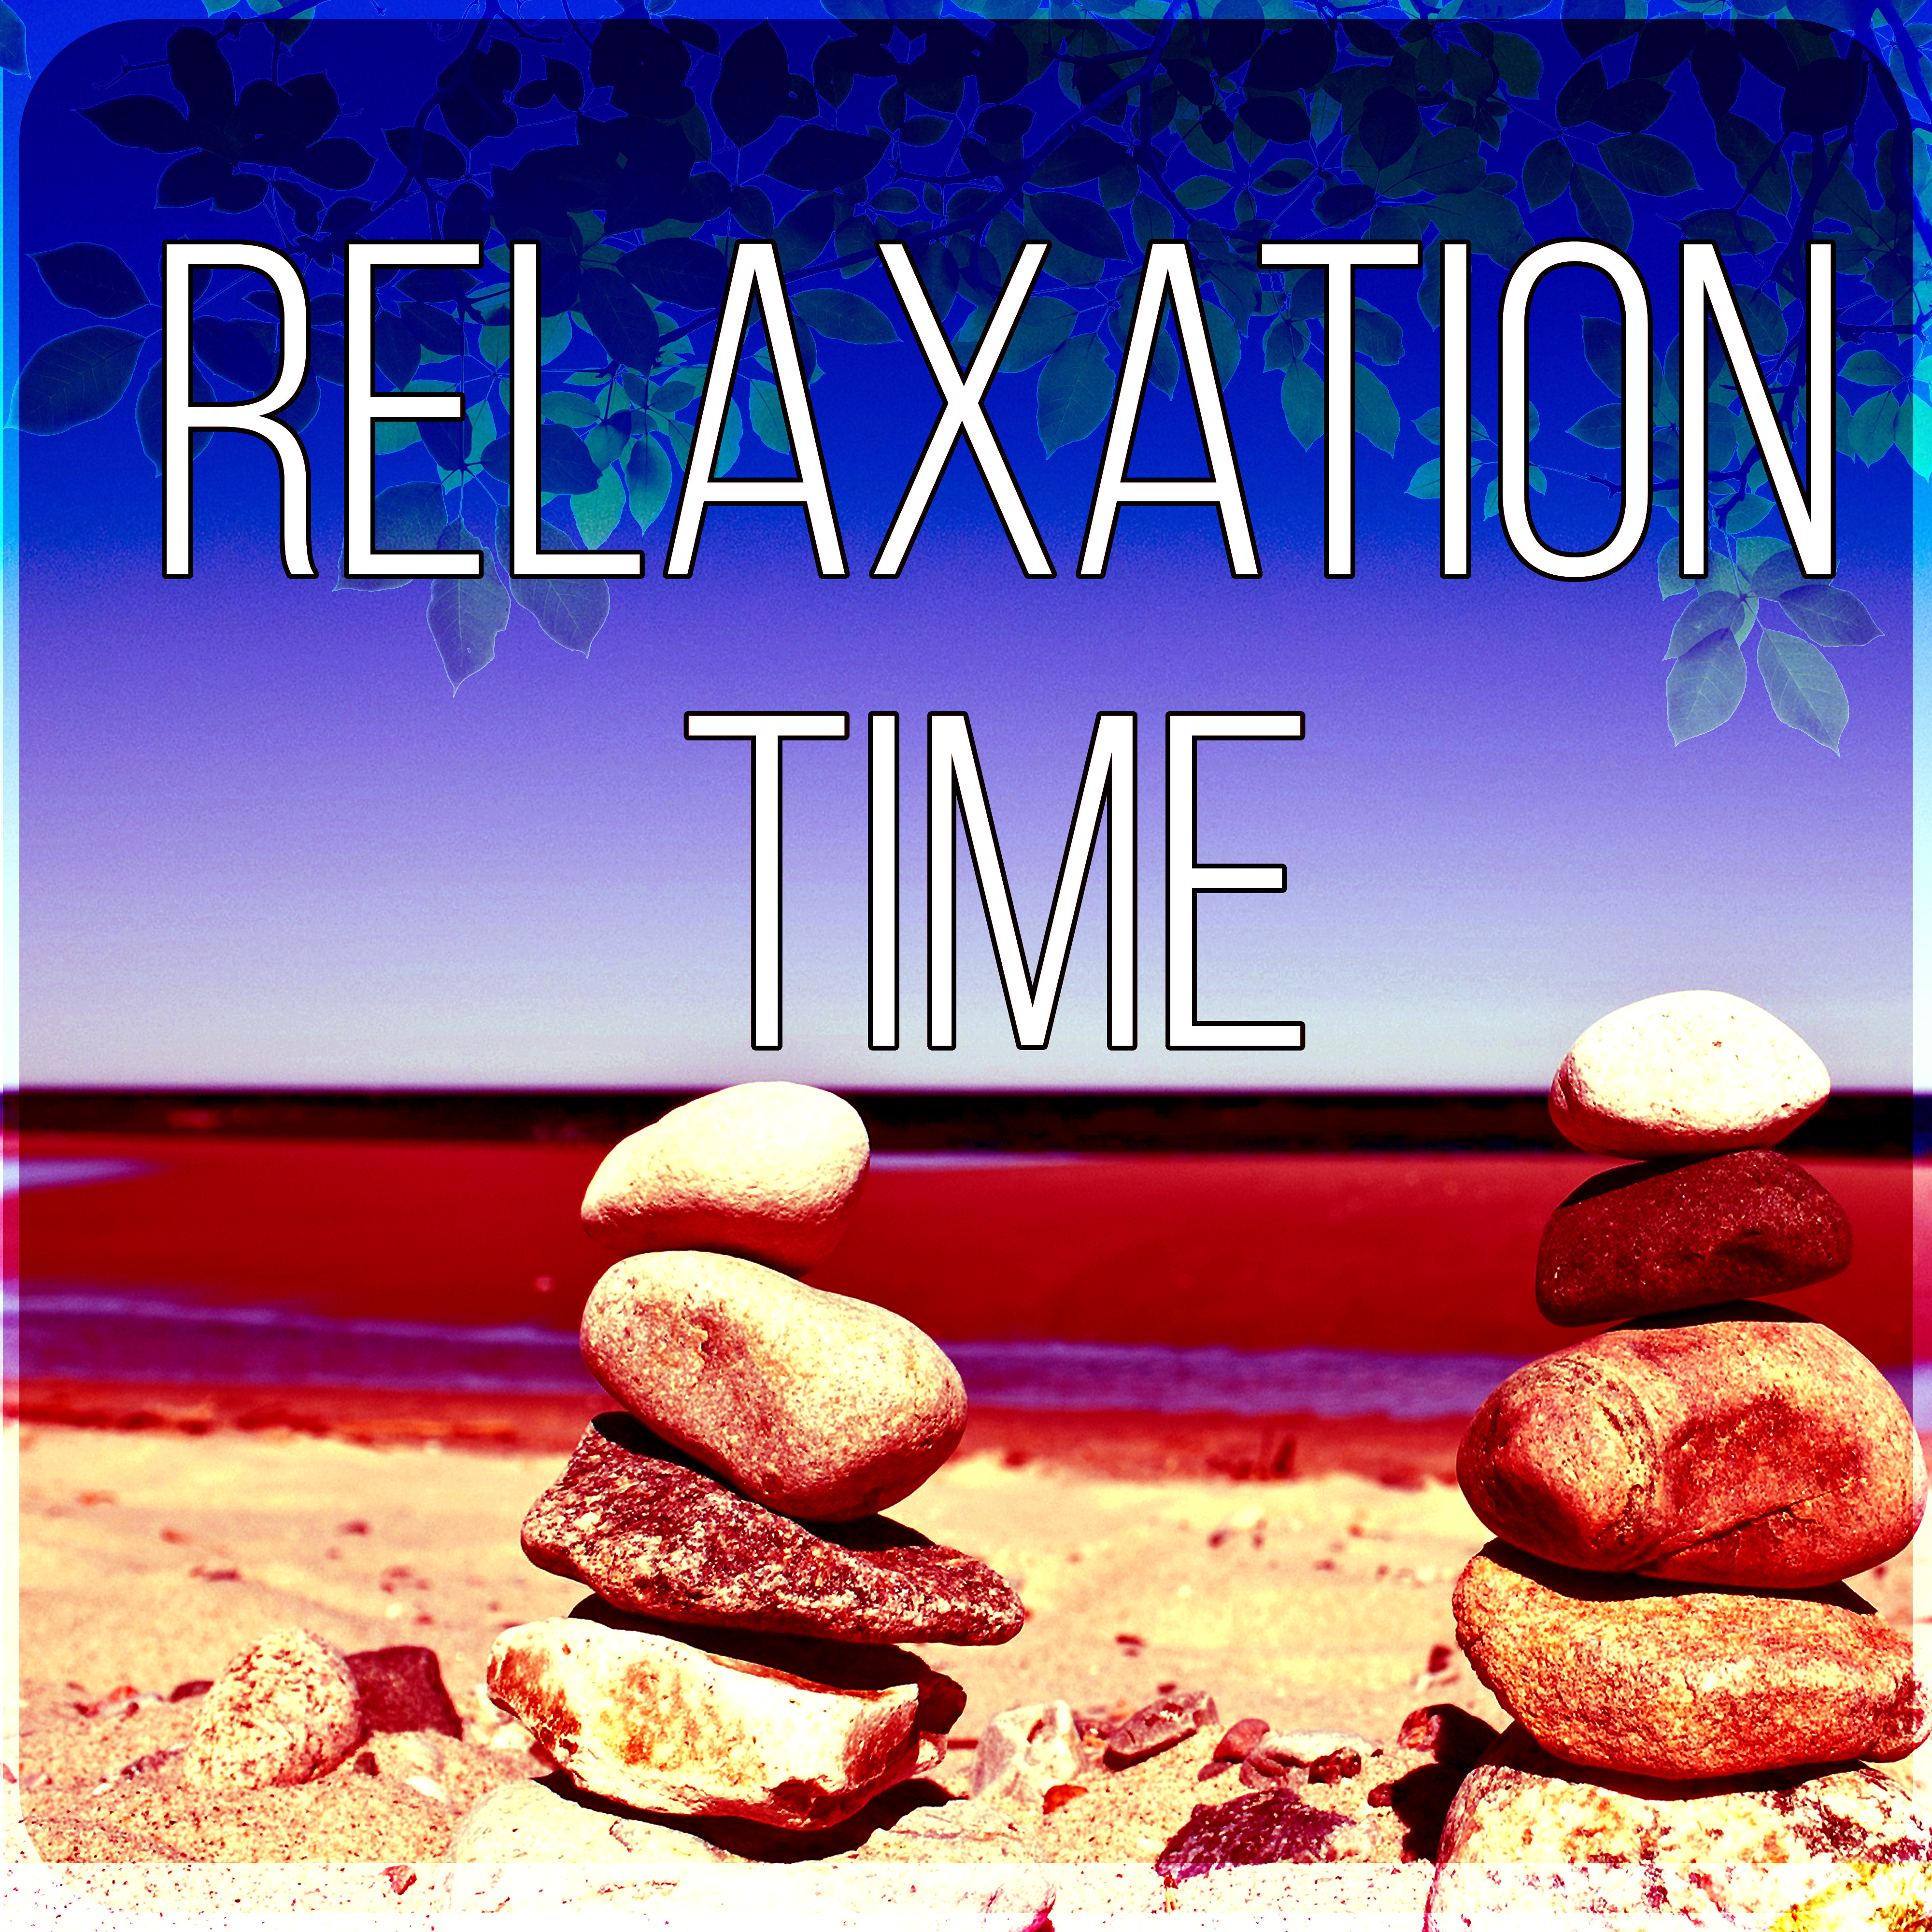 Relaxation Time - Deep Meditation Music for Relaxation and Breathing Techniques for Stress Relief, Calm Background Music and Uplifting Music to DeStress the Body & Mind